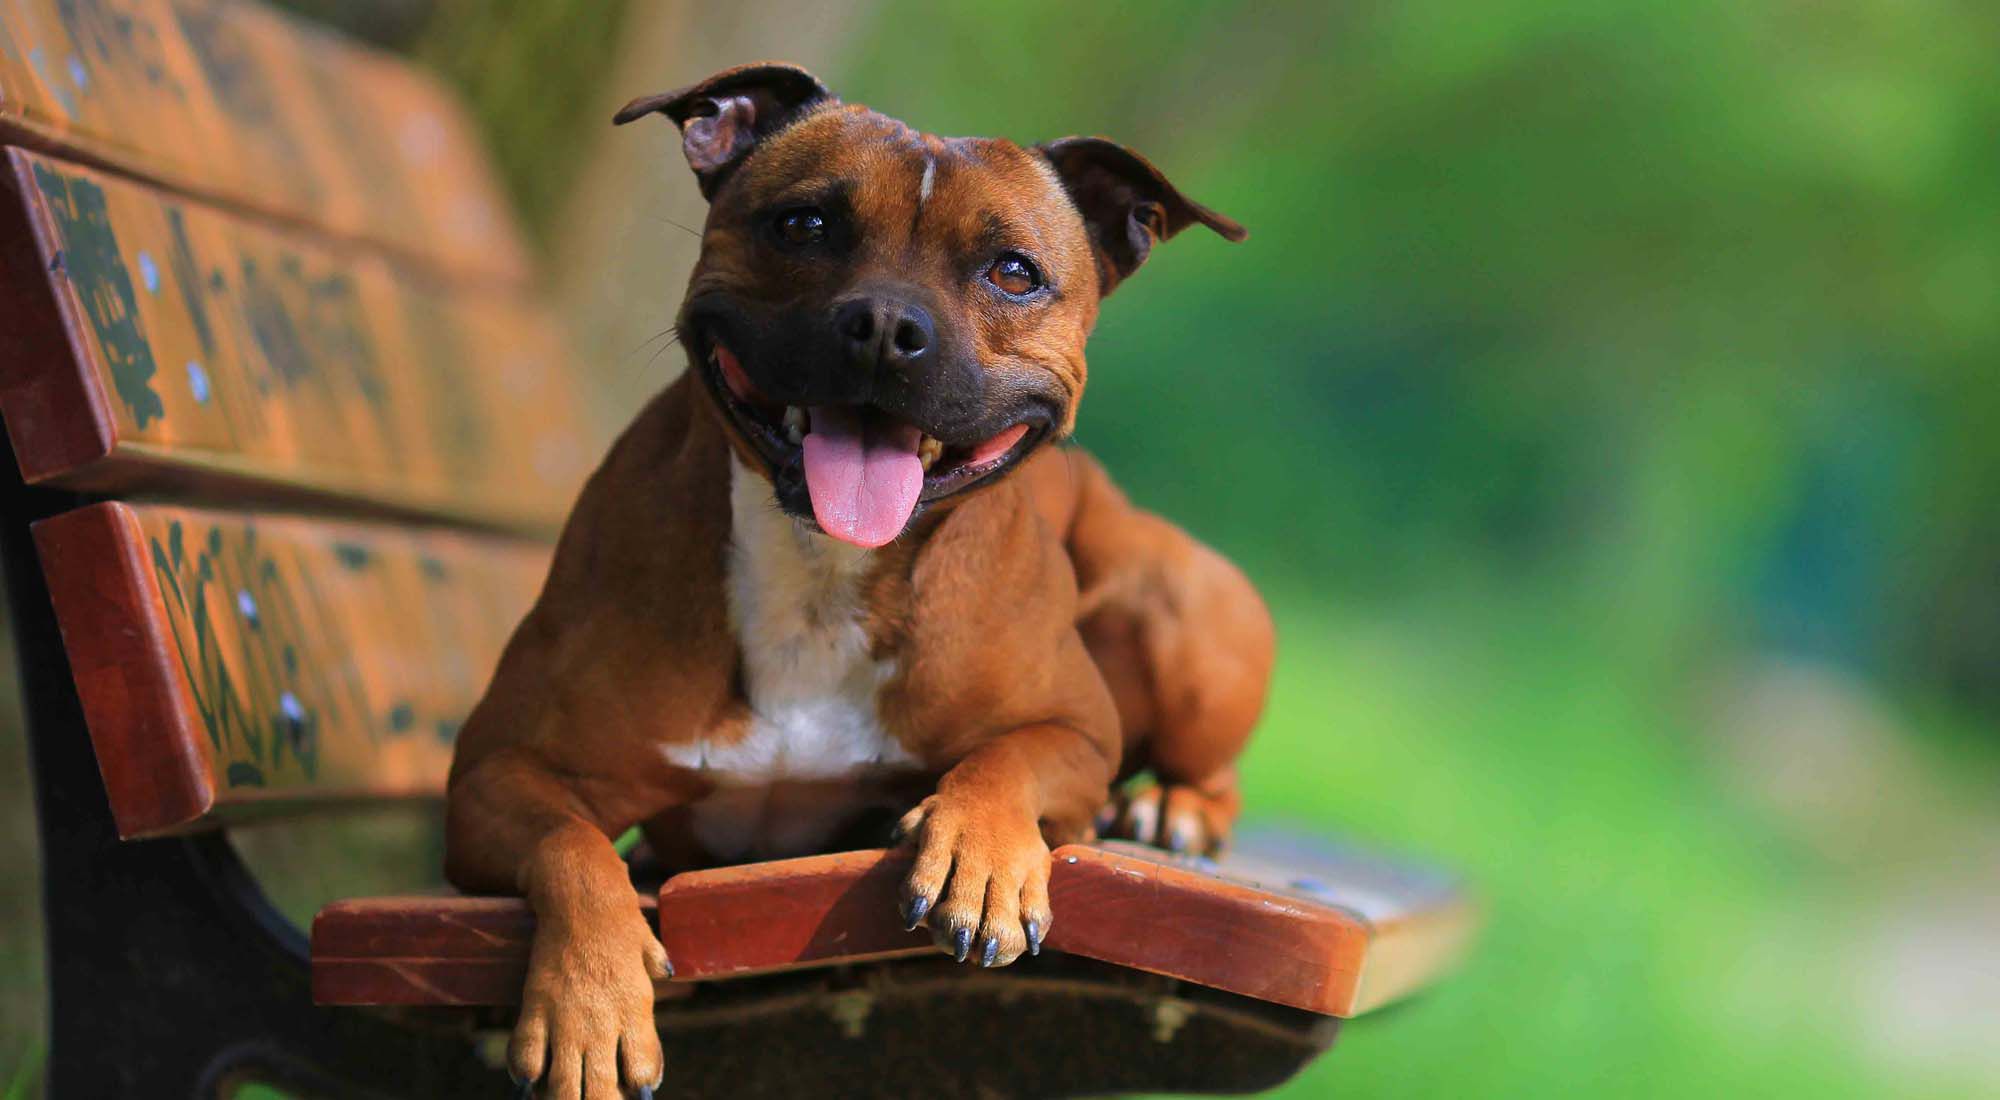 Staffordshire Bull Terrier Wallpaper Image Photo Picture